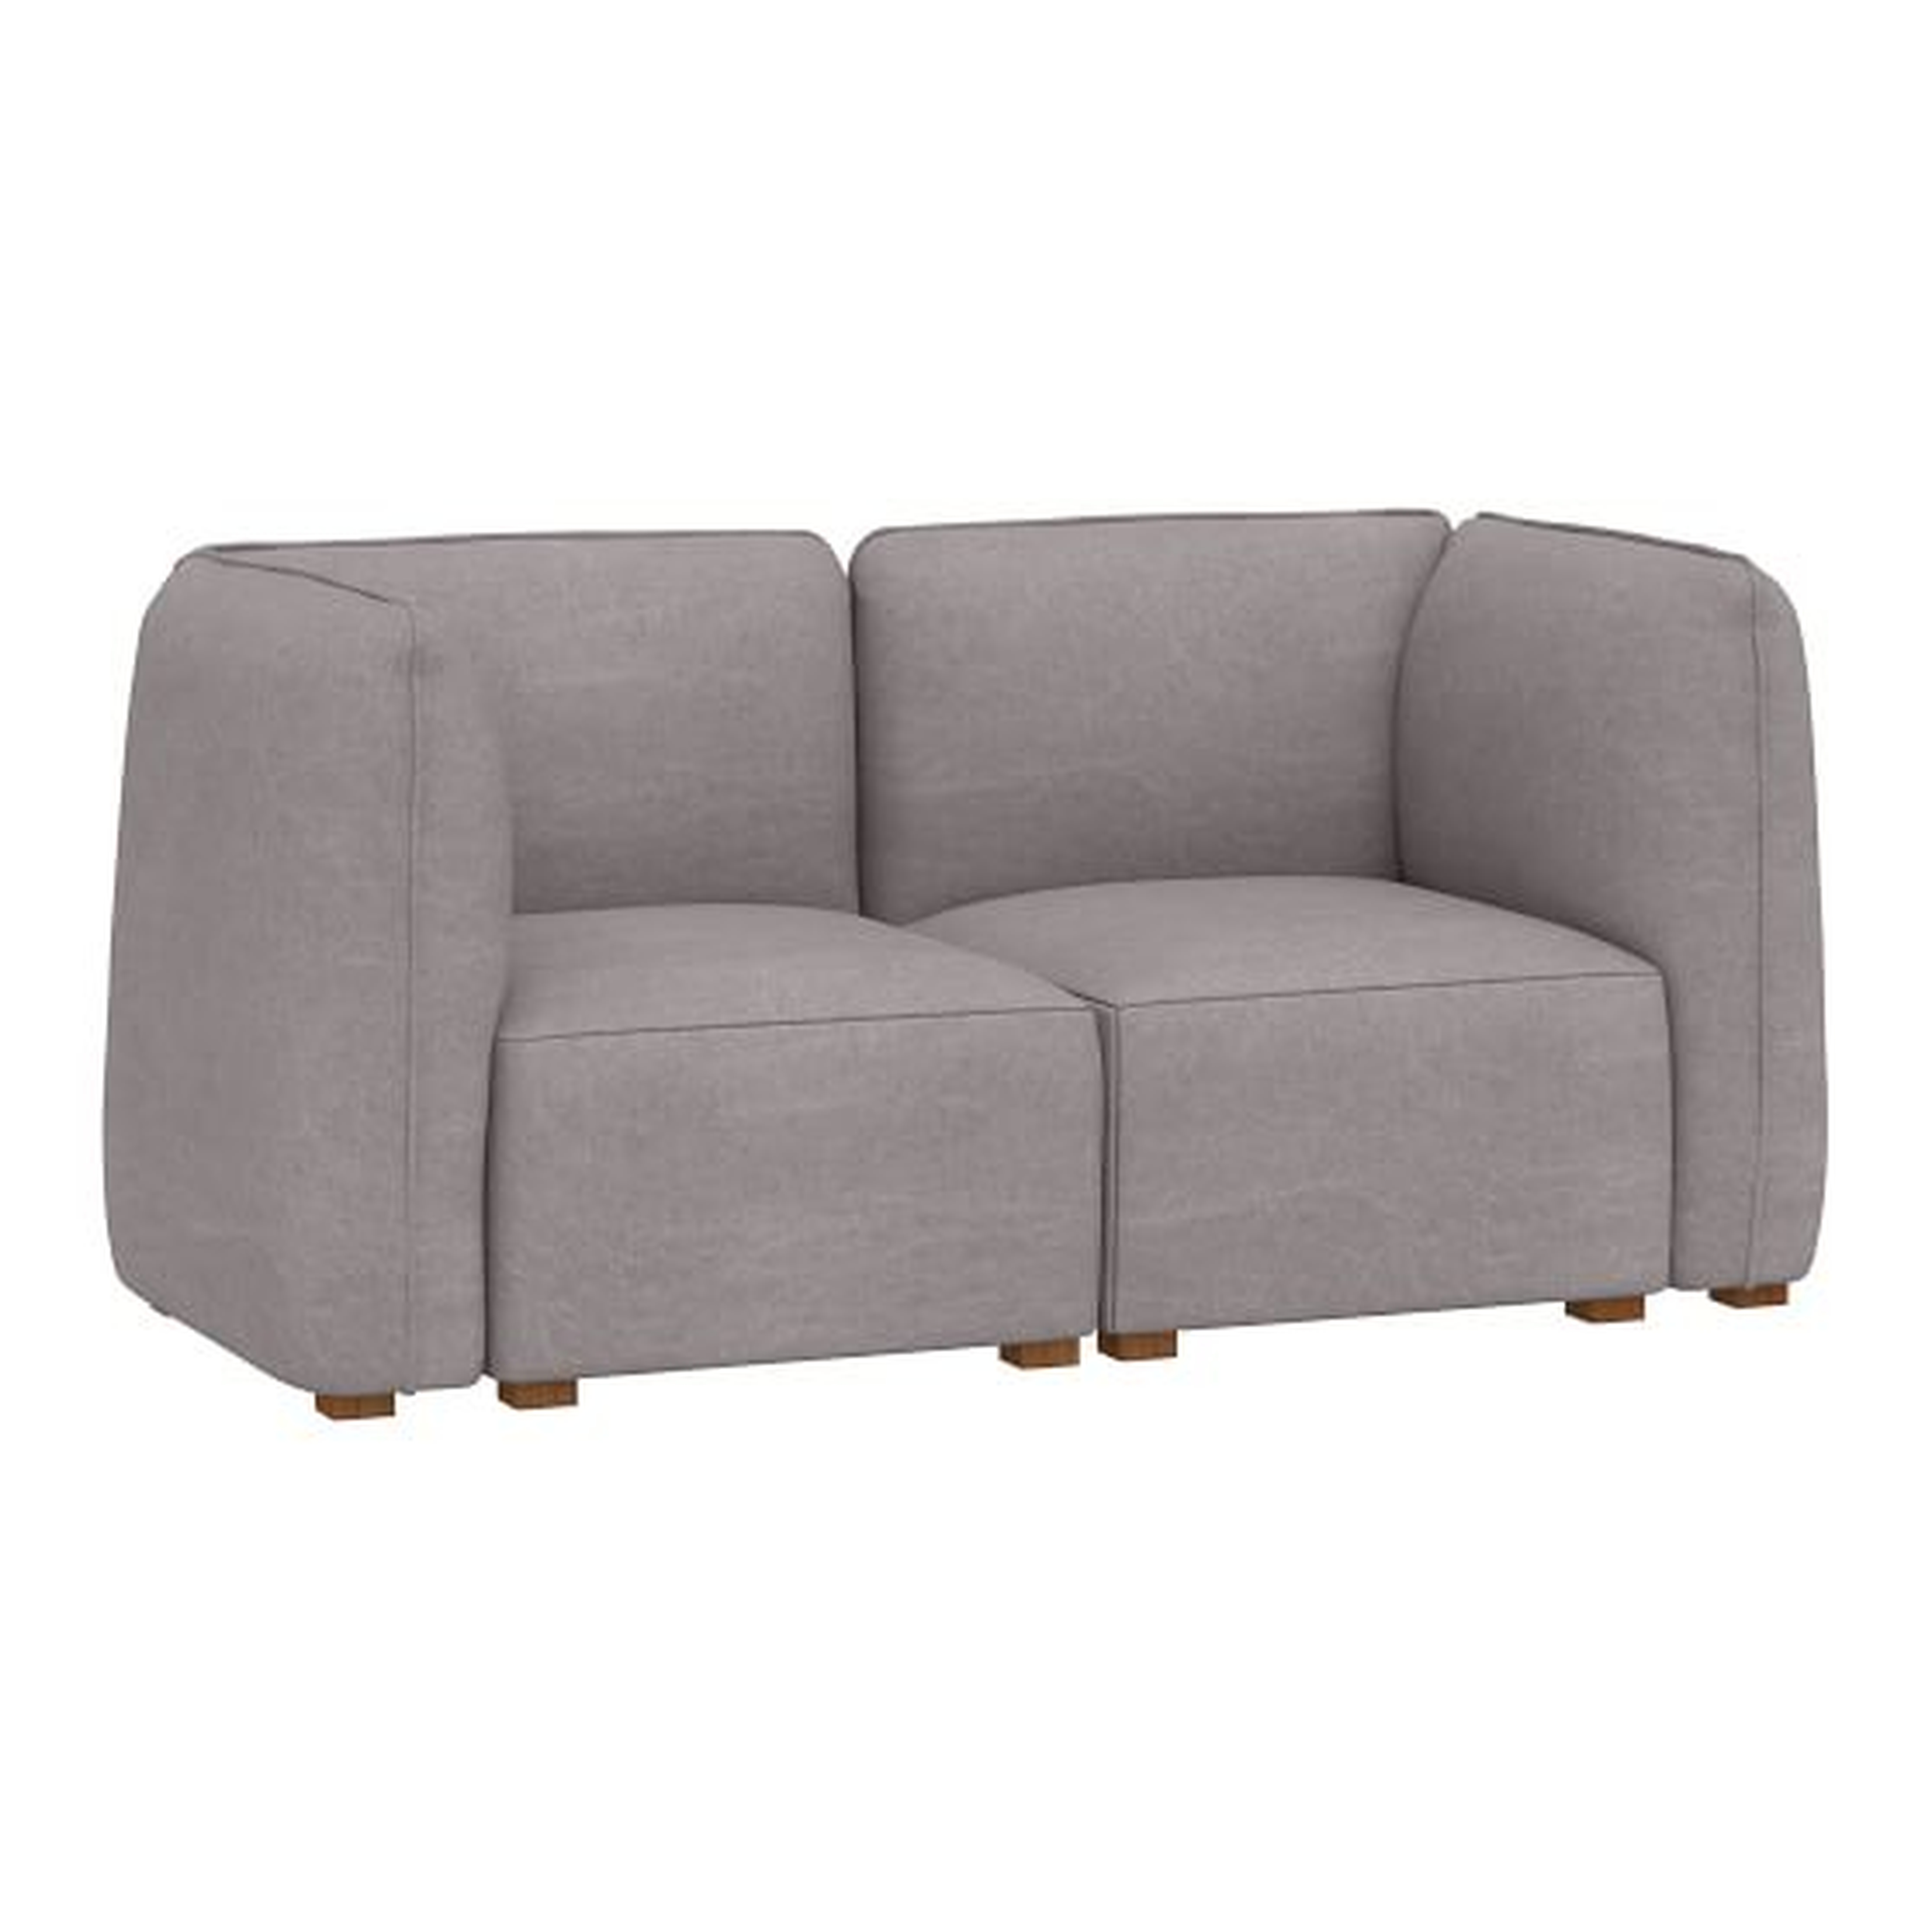 Bryce Lounge Loveseat Set, Light Gray, Enzyme Washed Canvas - Pottery Barn Teen